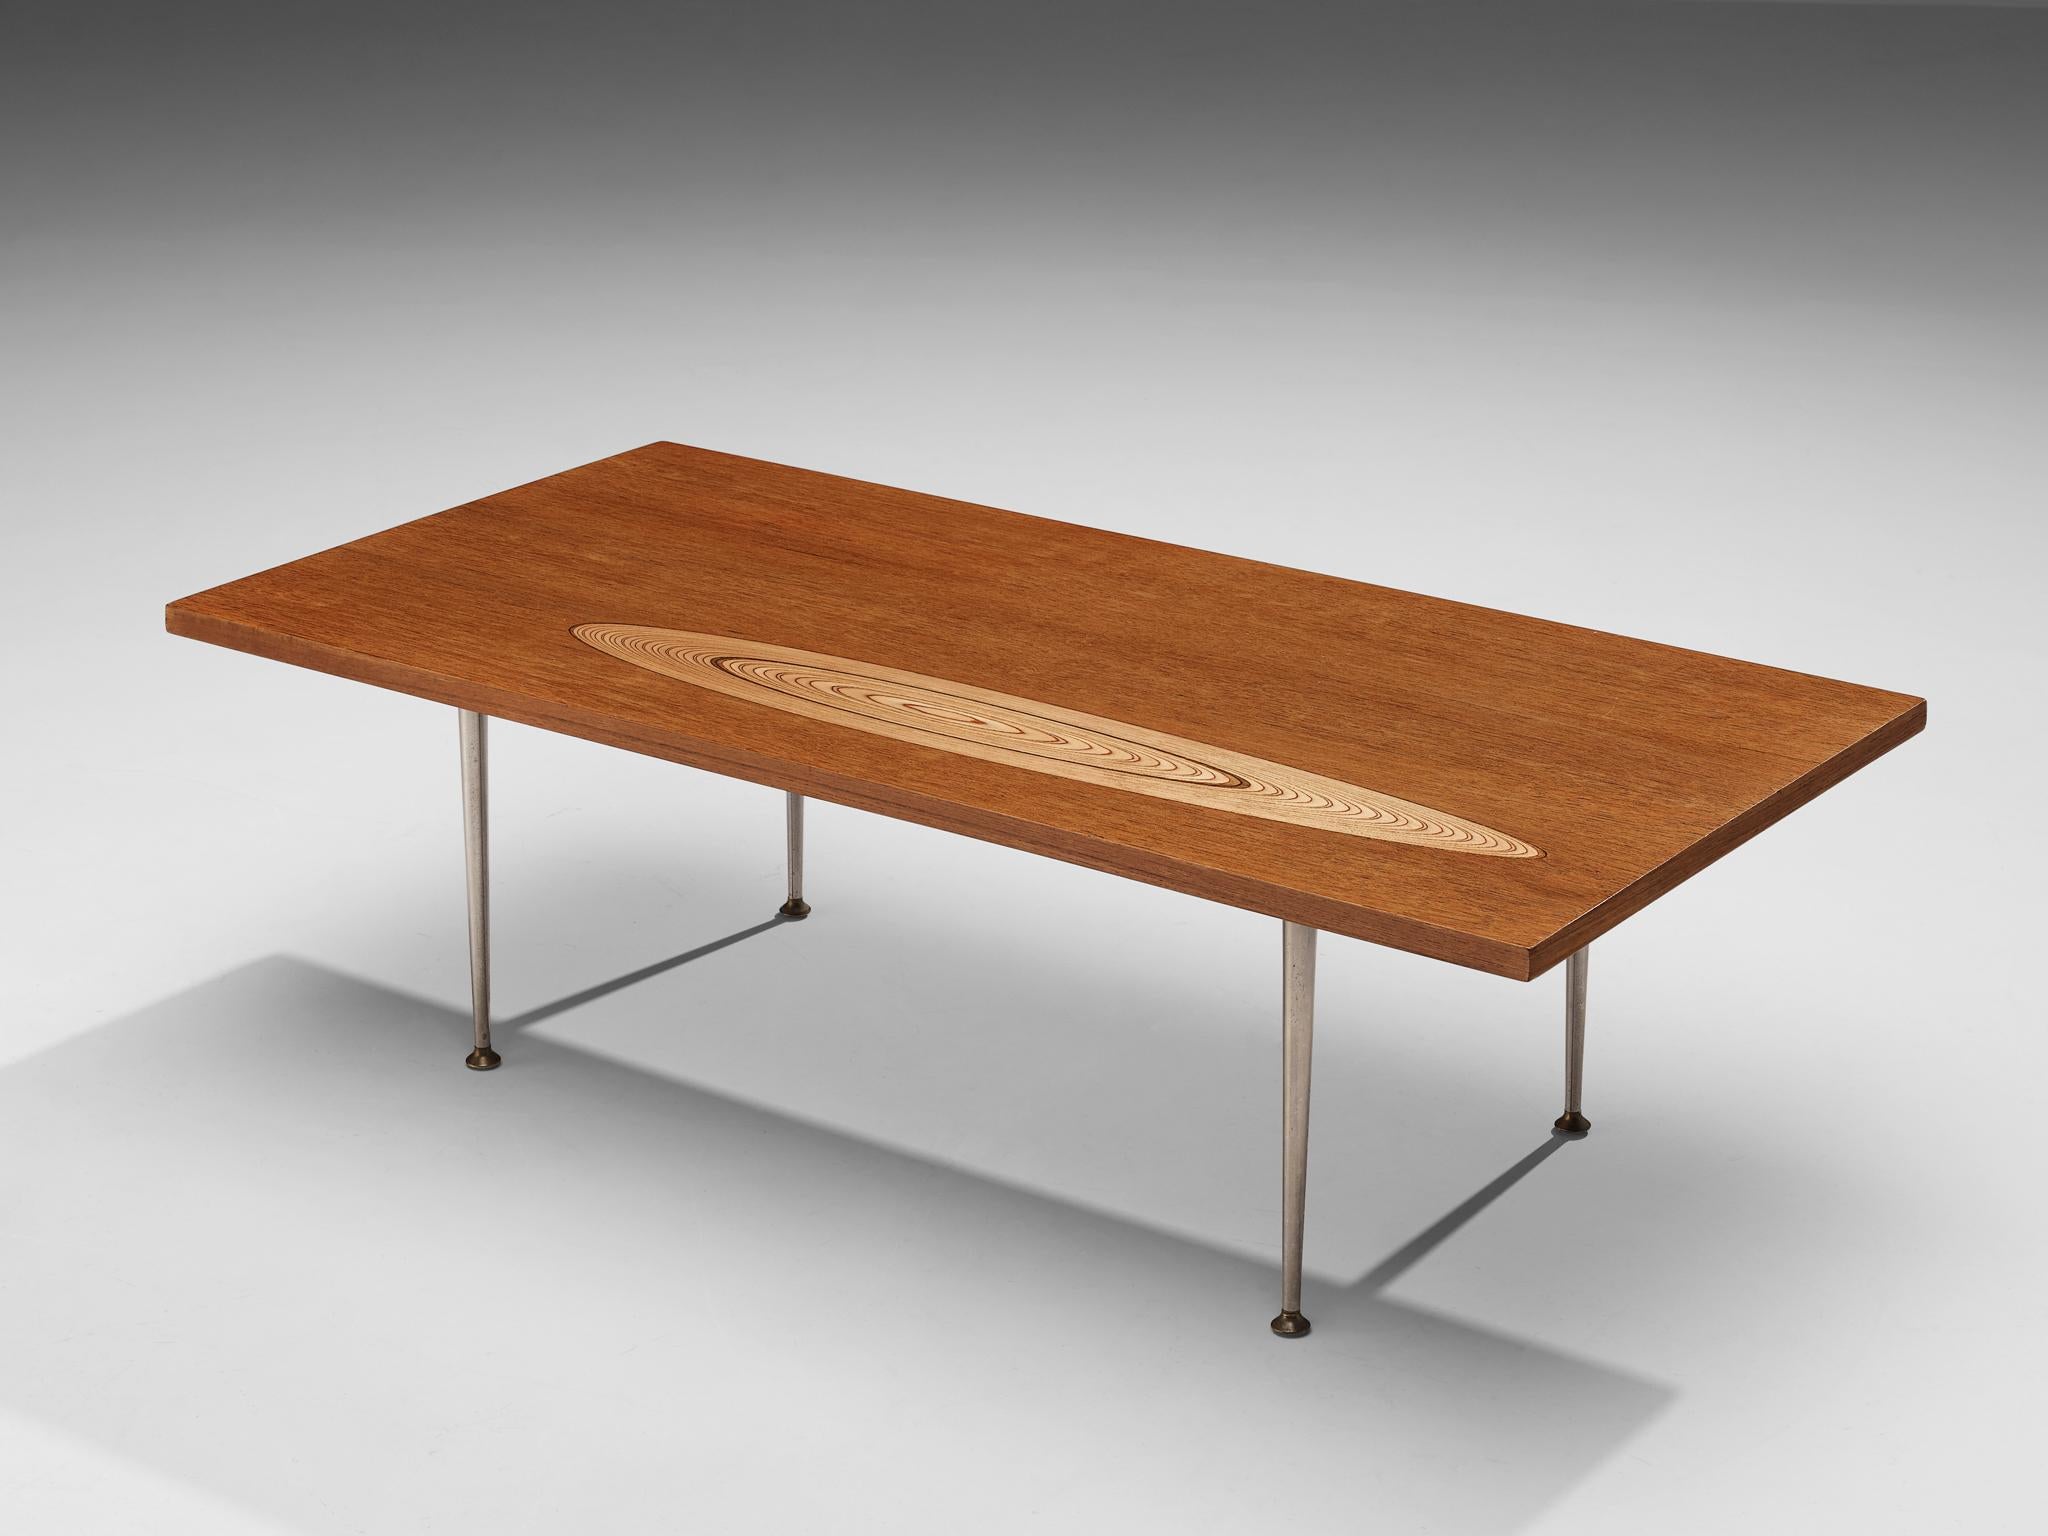 Tapio Wirkkala for Asko, cocktail table, birch, metal, Finland, 1960s.

This coffee table is one of Wirkkala's iconic furniture designs. Made with one oval shaped wood inlay that resembles the core of a tree with annual rings. The top is rectangular